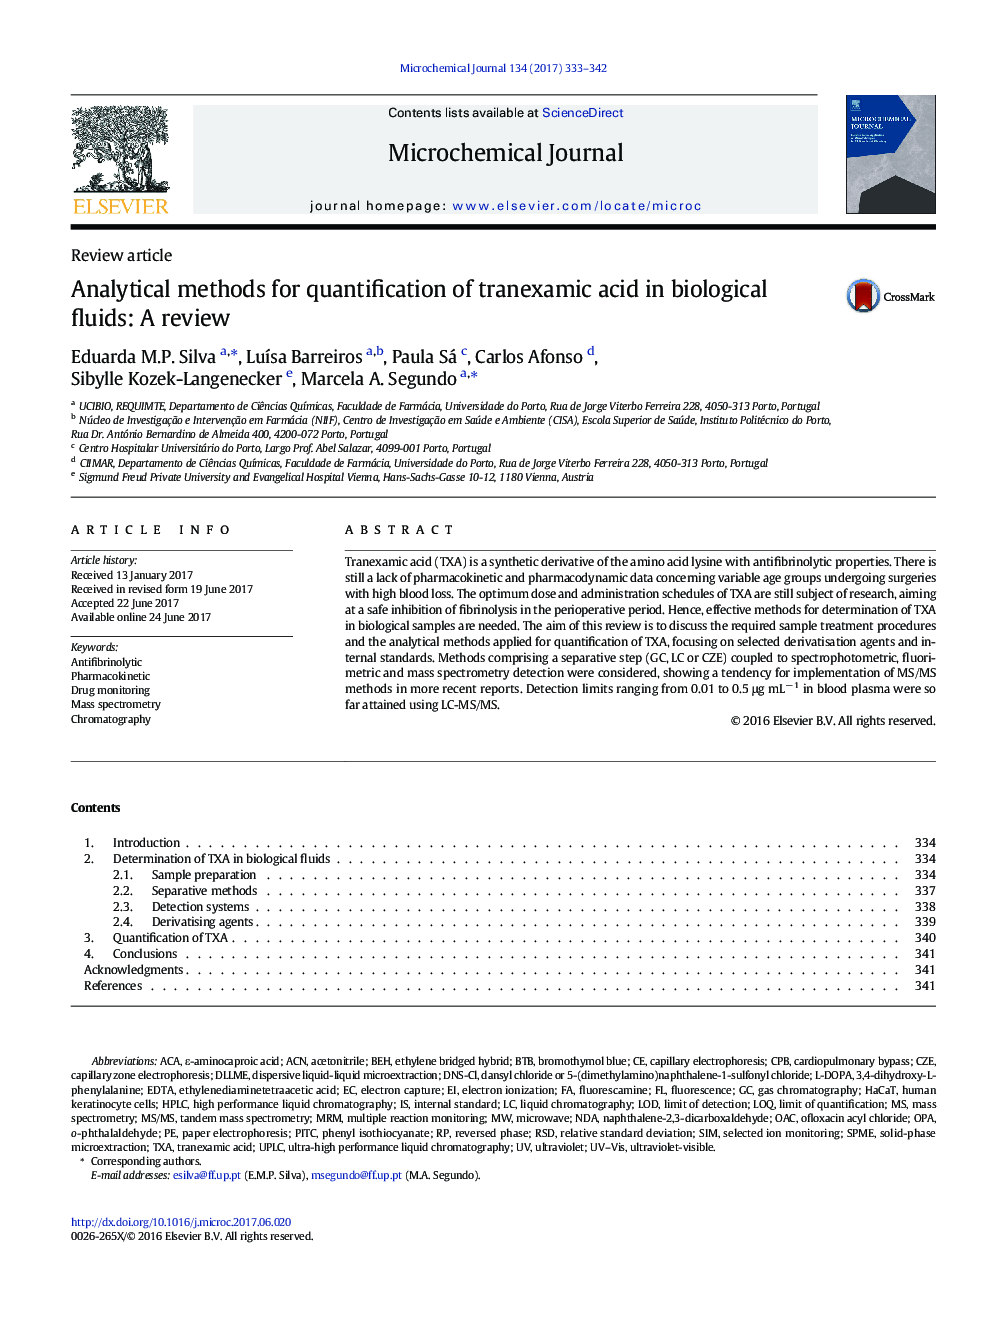 Analytical methods for quantification of tranexamic acid in biological fluids: A review